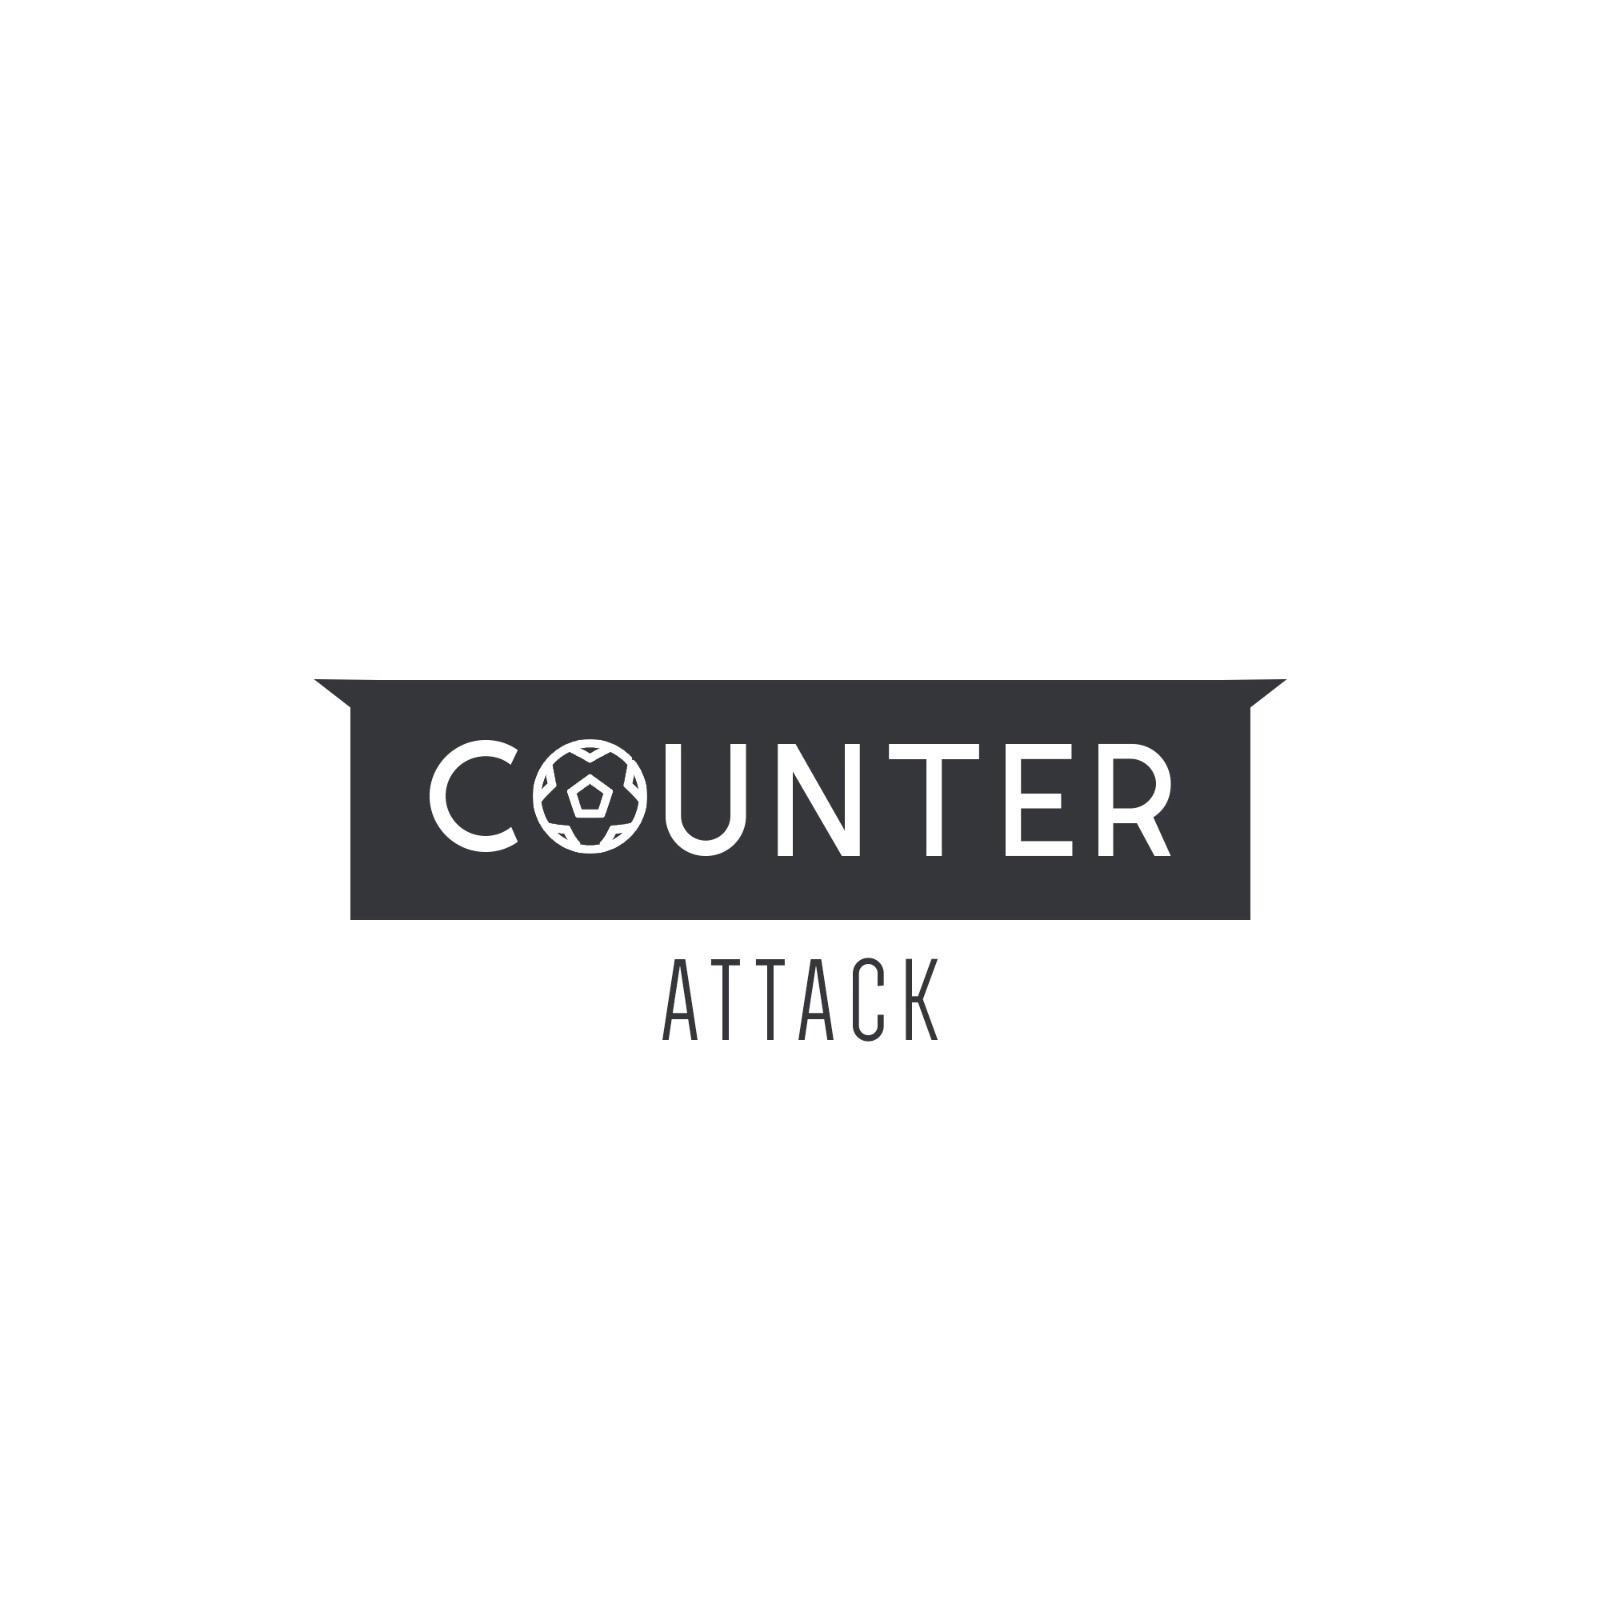 Counter Attack - Episode 156 - The Gunners Shooting Blanks Against Liverpool